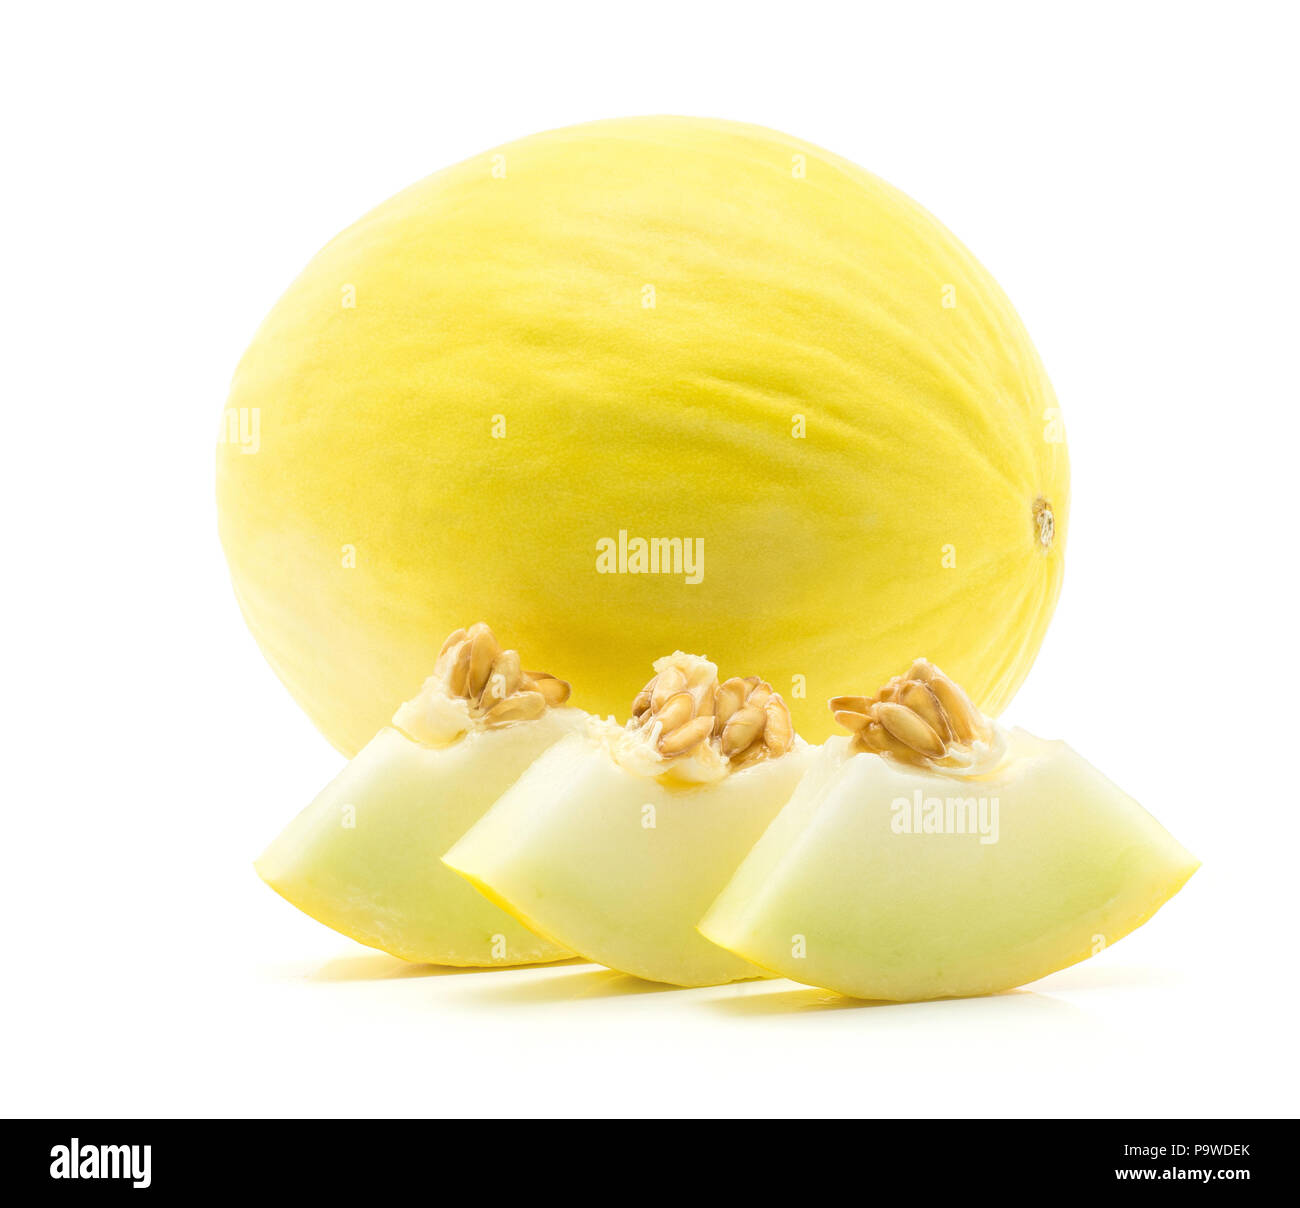 One yellow honeydew melon with three cut pieces isolated on white background Stock Photo